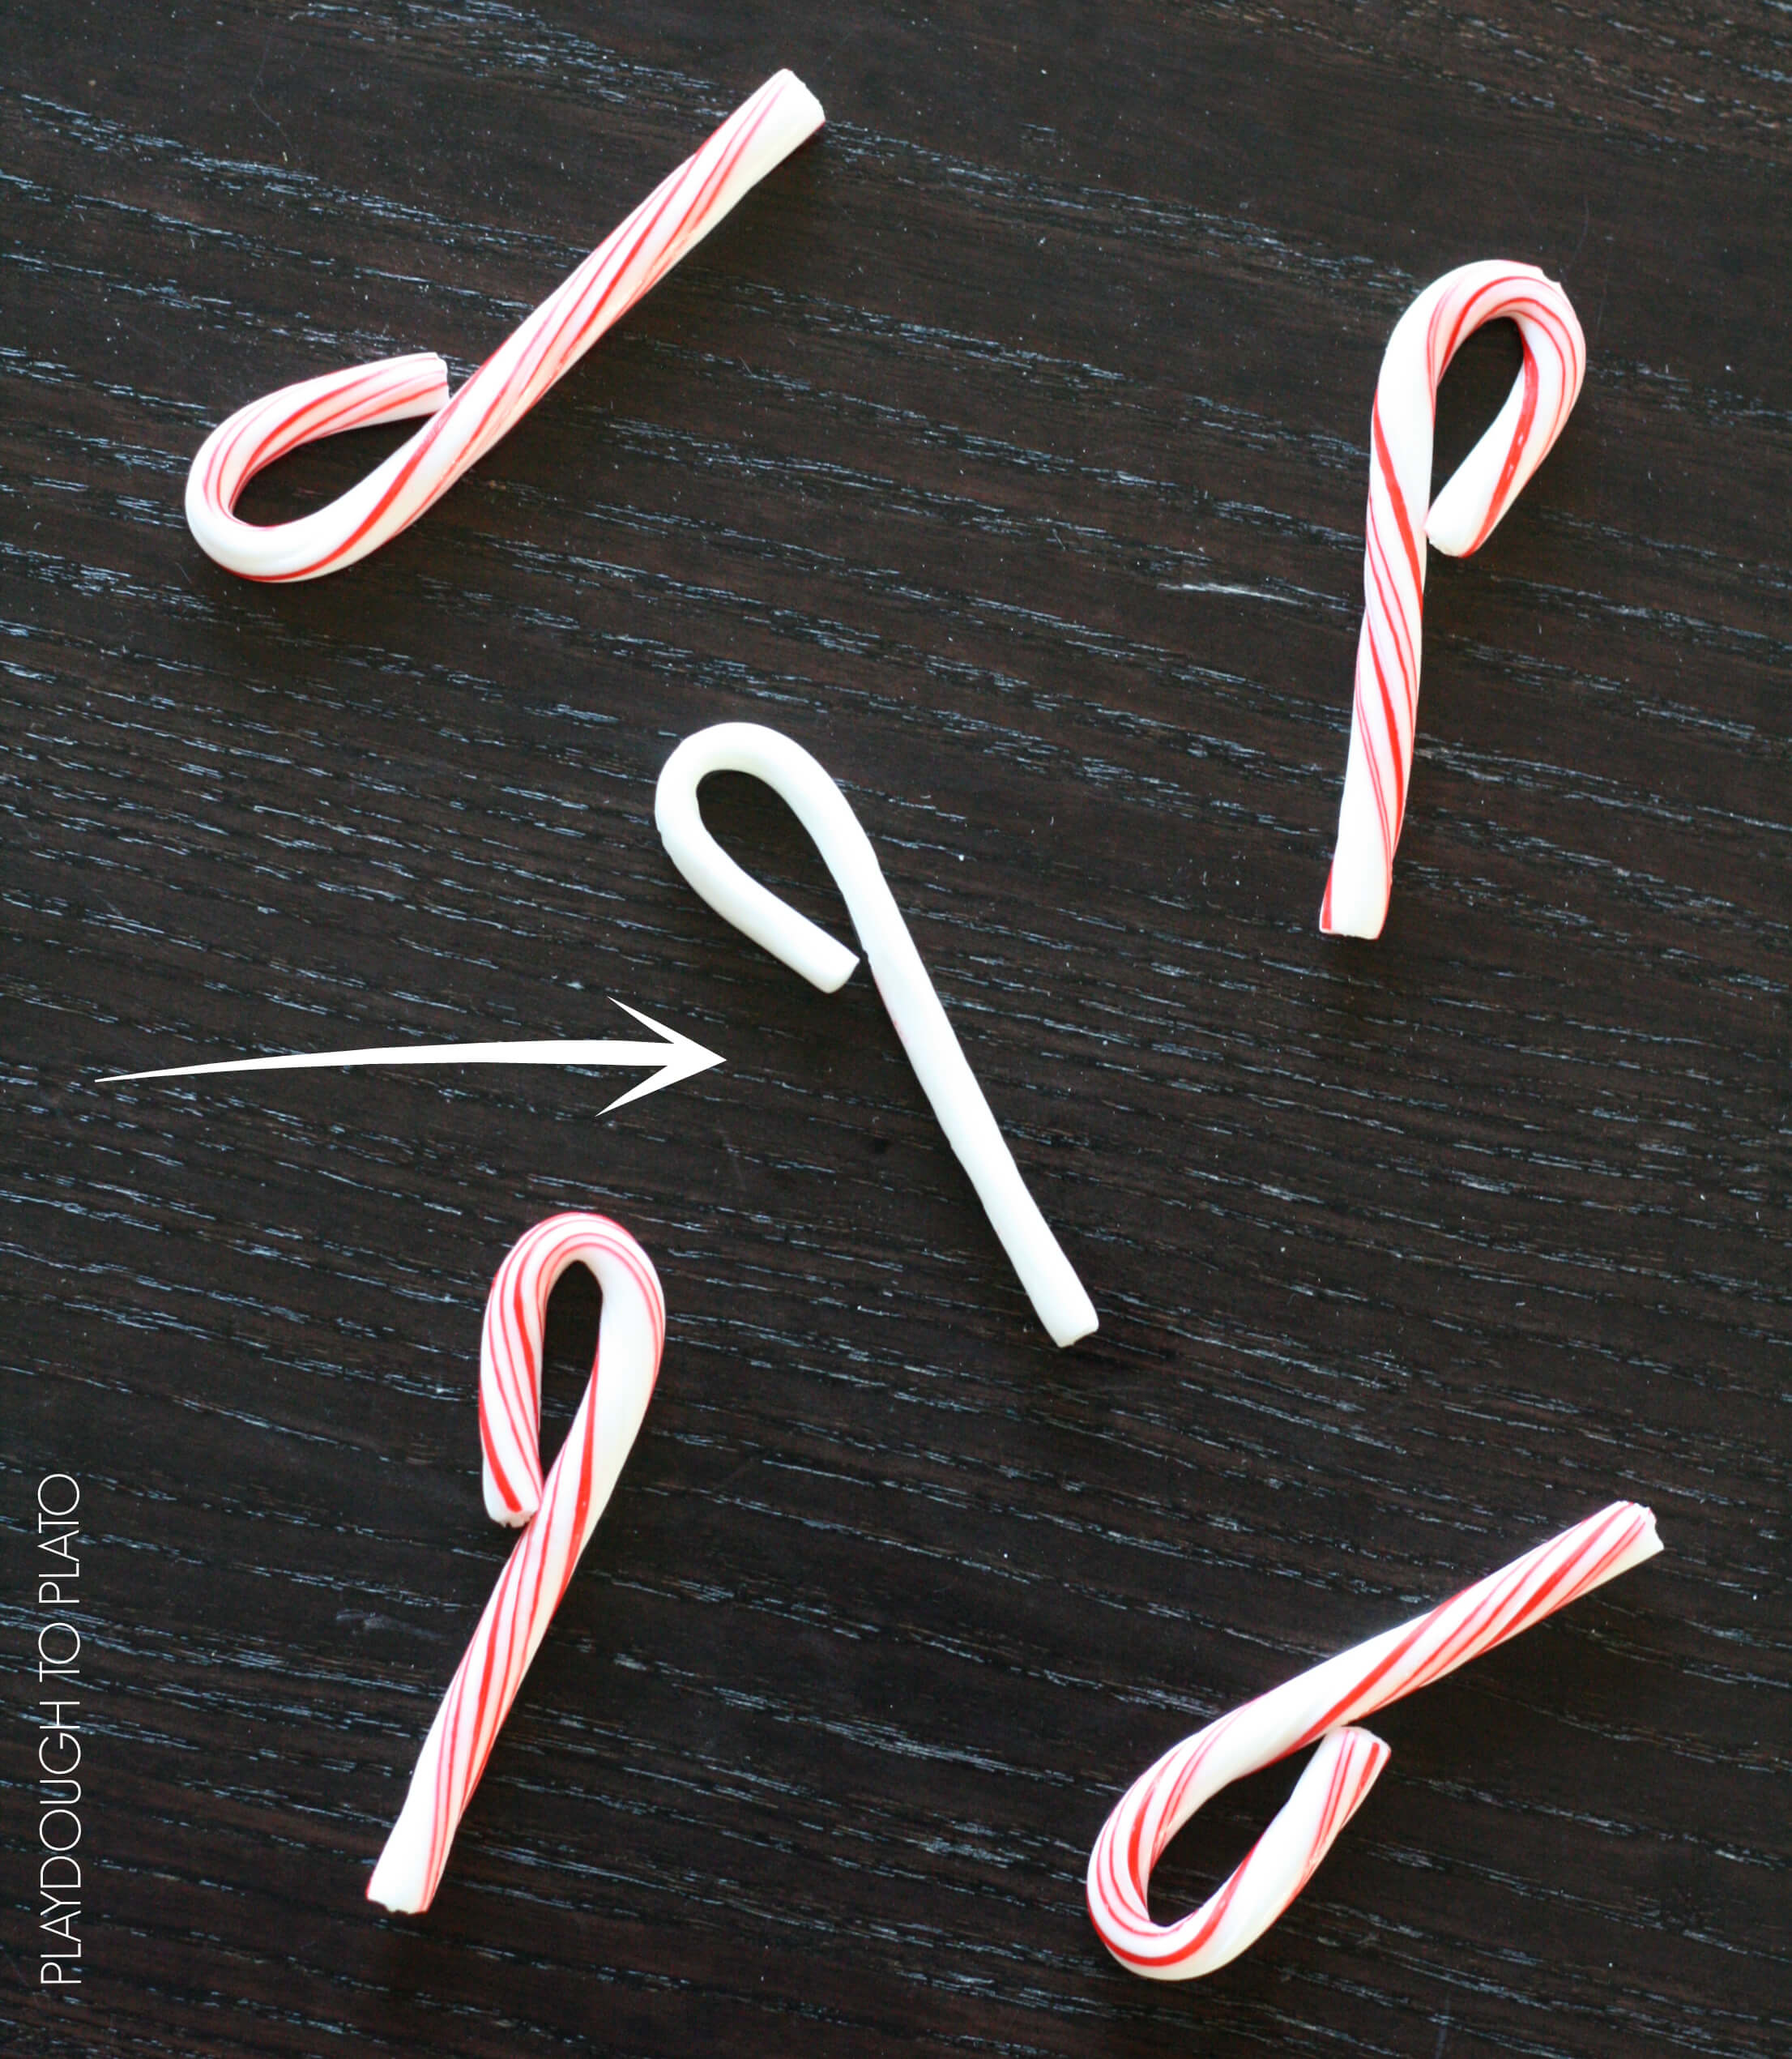 Super fun kids science experiment. Make candy cane stripes disappear. 